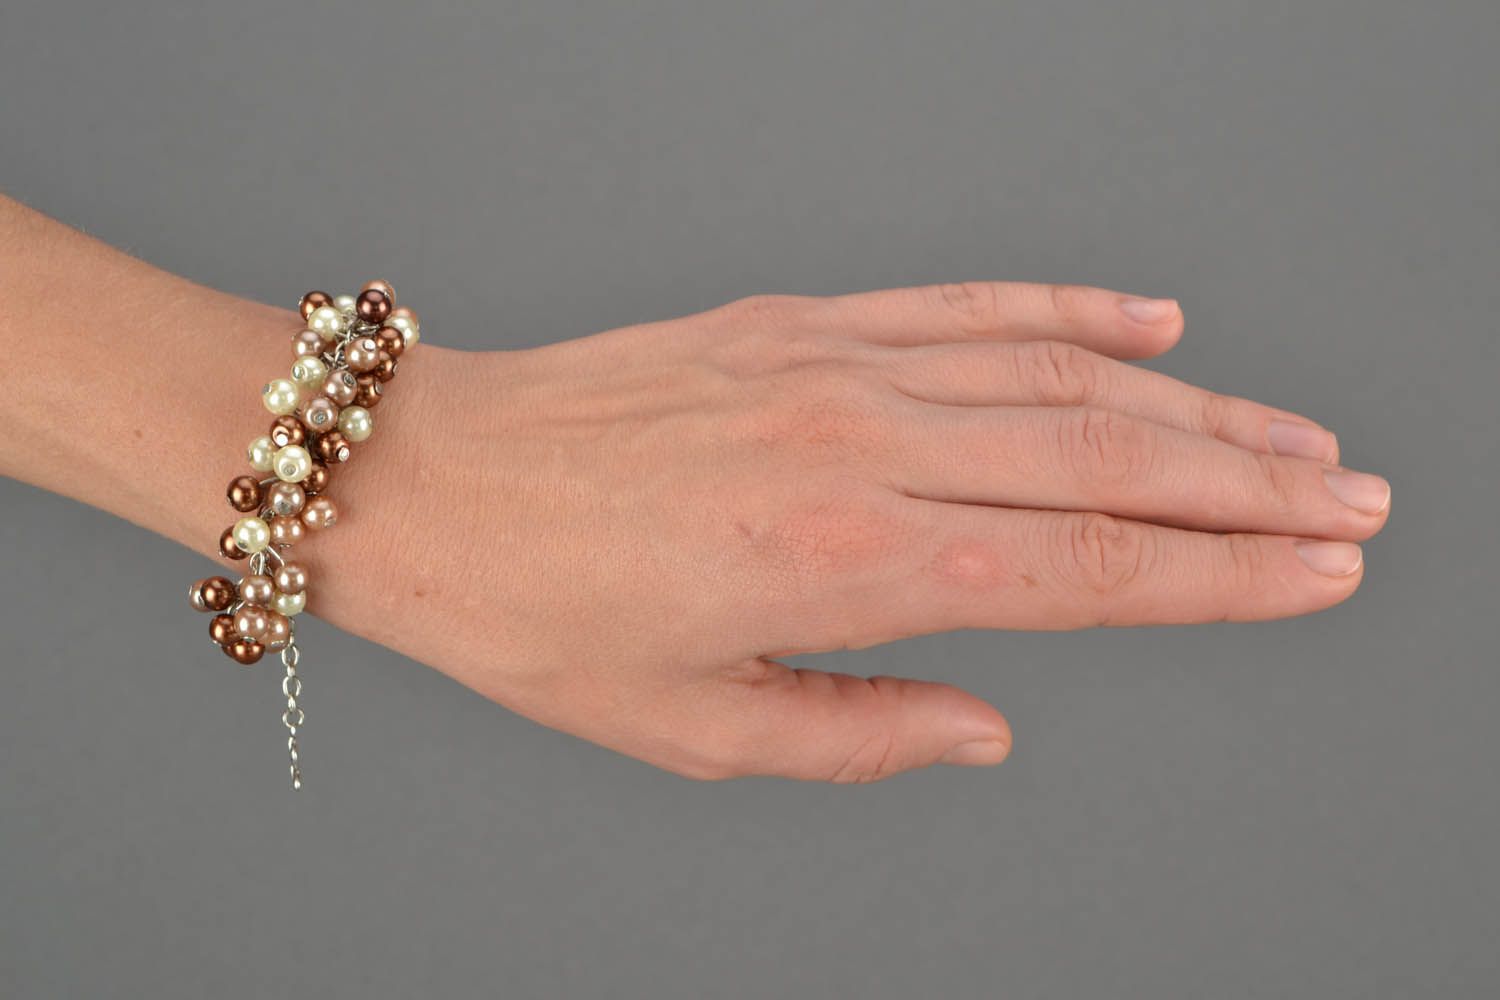 Bracelet made of artificial pearls with charm photo 2